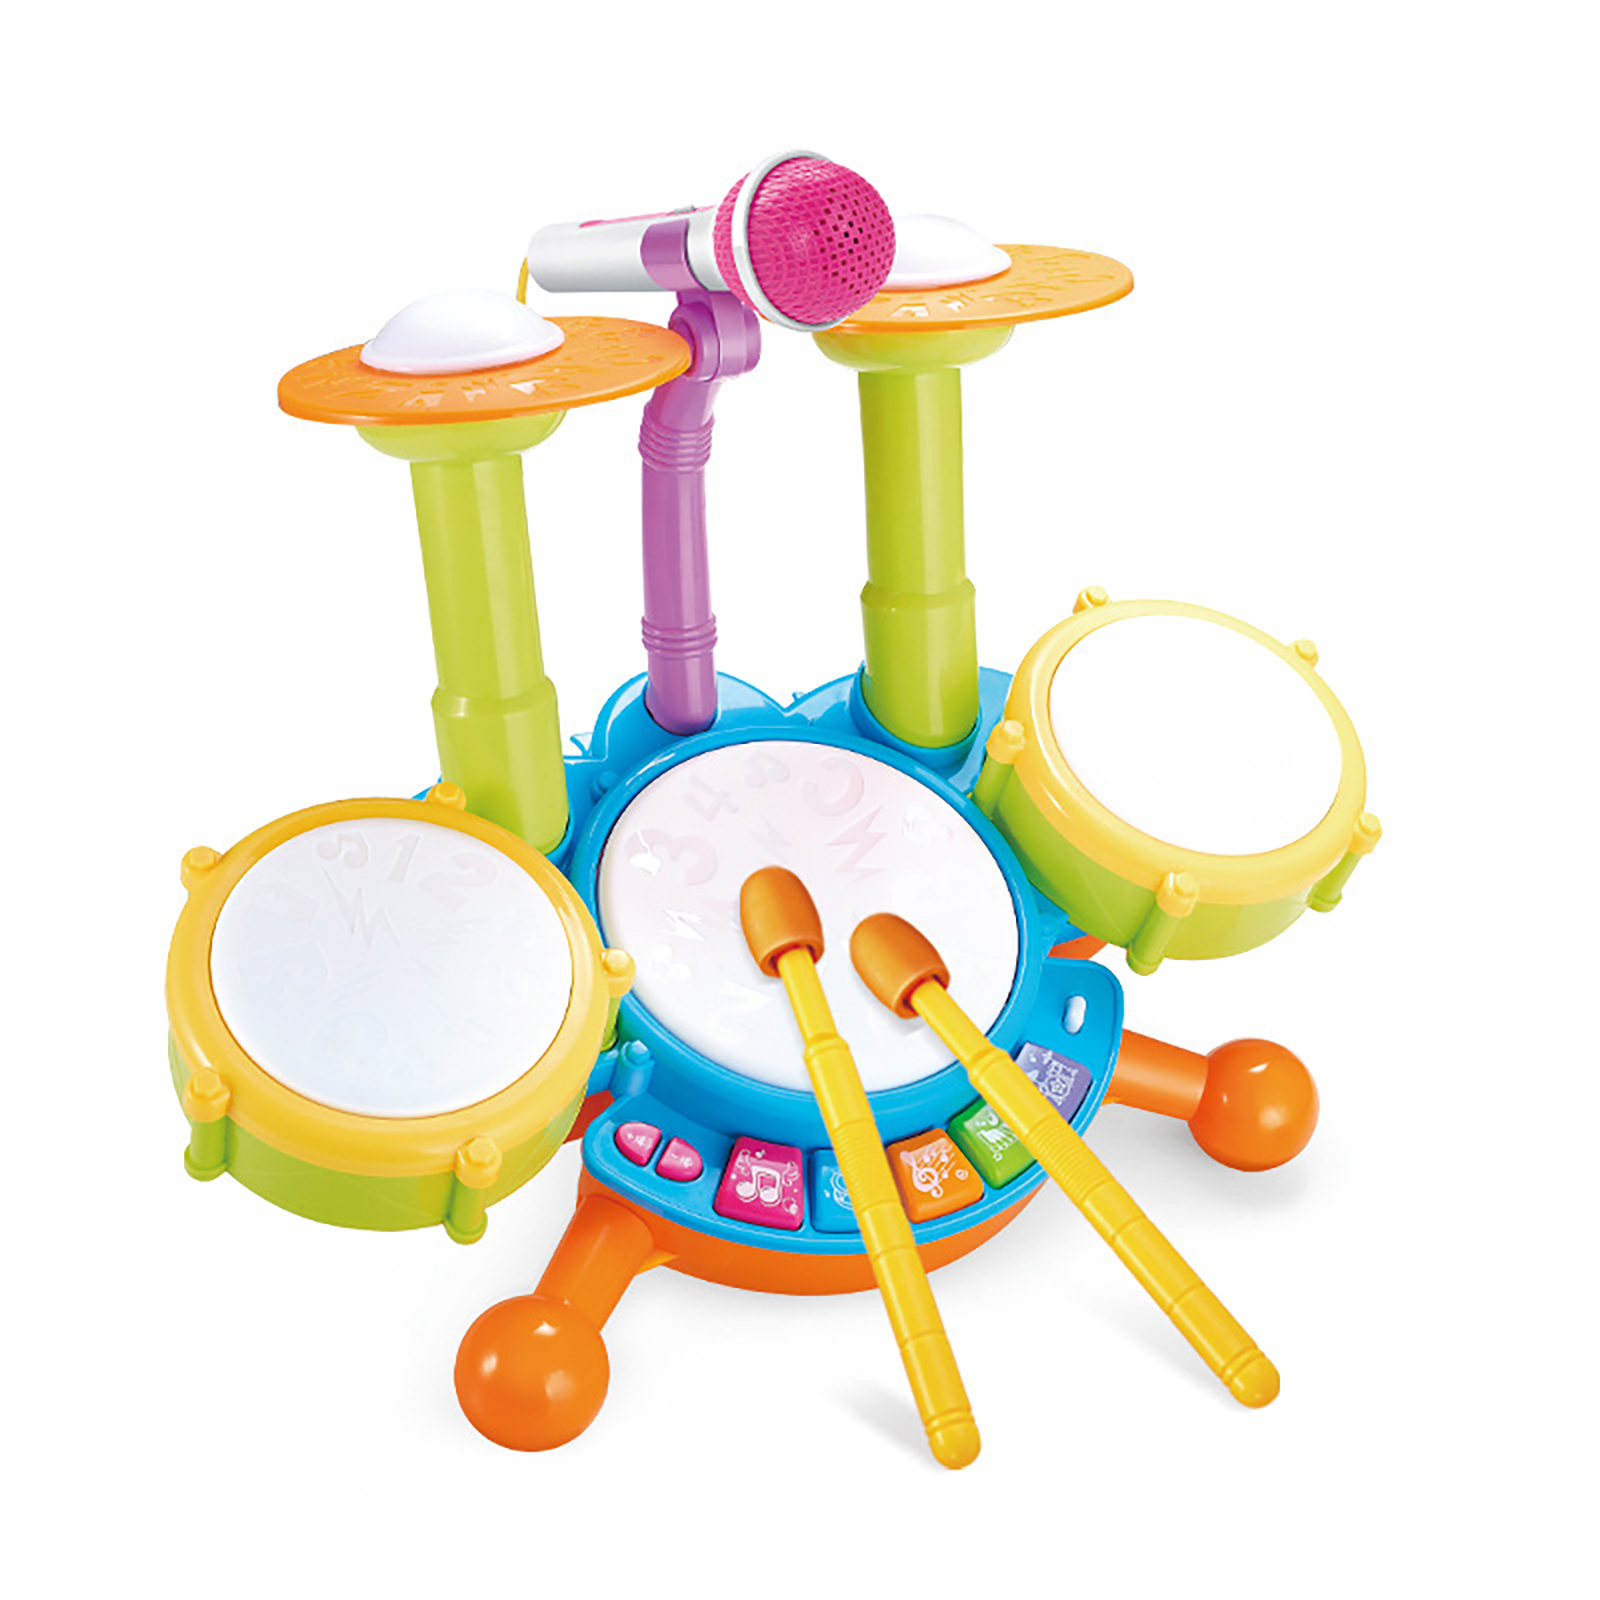 Kids Drum Set For Toddler Musical Toys With Microphone Drum Sticks Musical Instruments Playset For Boys Girls Gifts